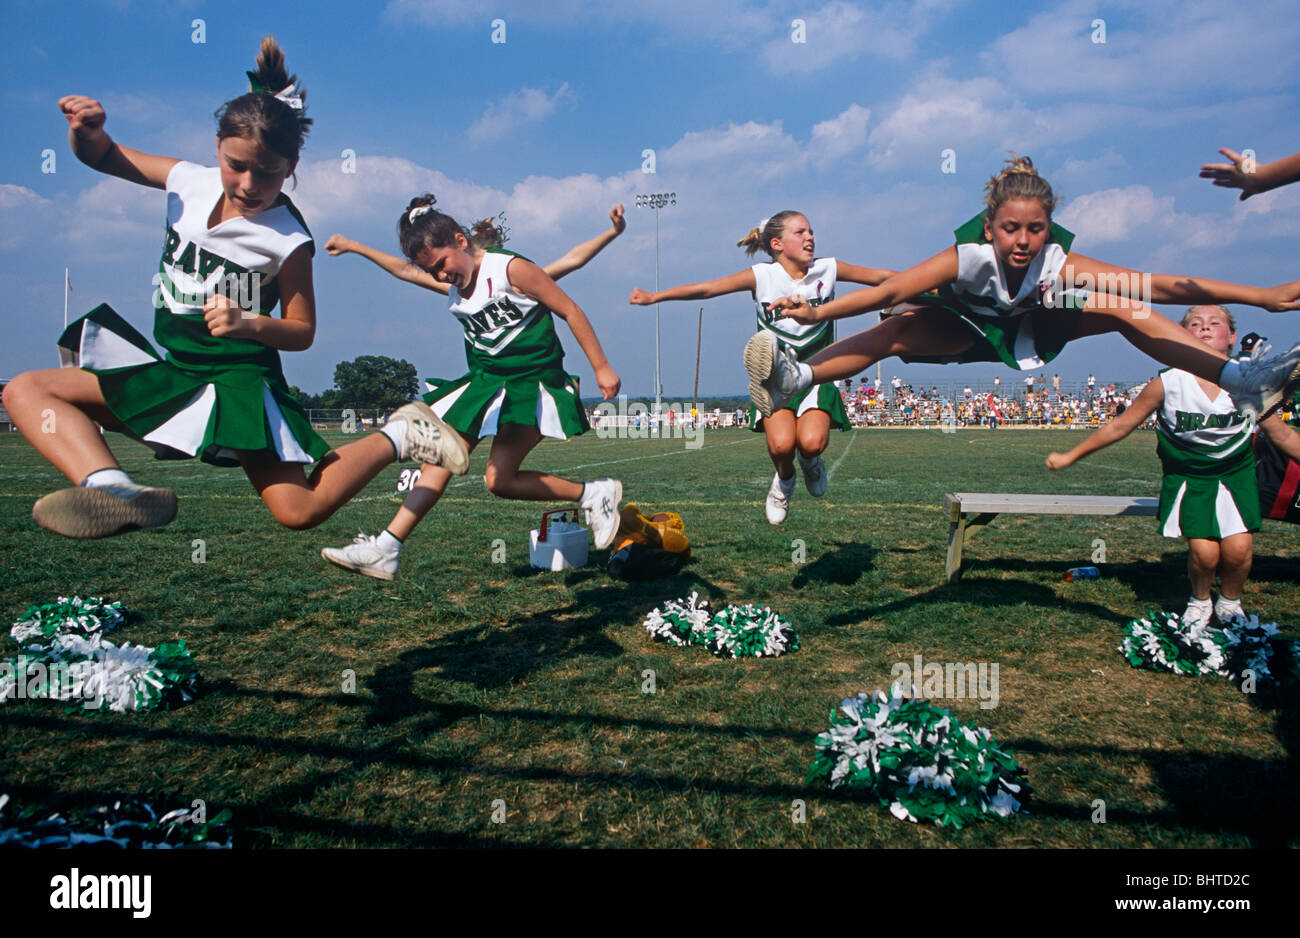 Leaping into the air all together are young members of the Donegal High School football cheerleaders squad in Pennsylvania, USA. Stock Photo